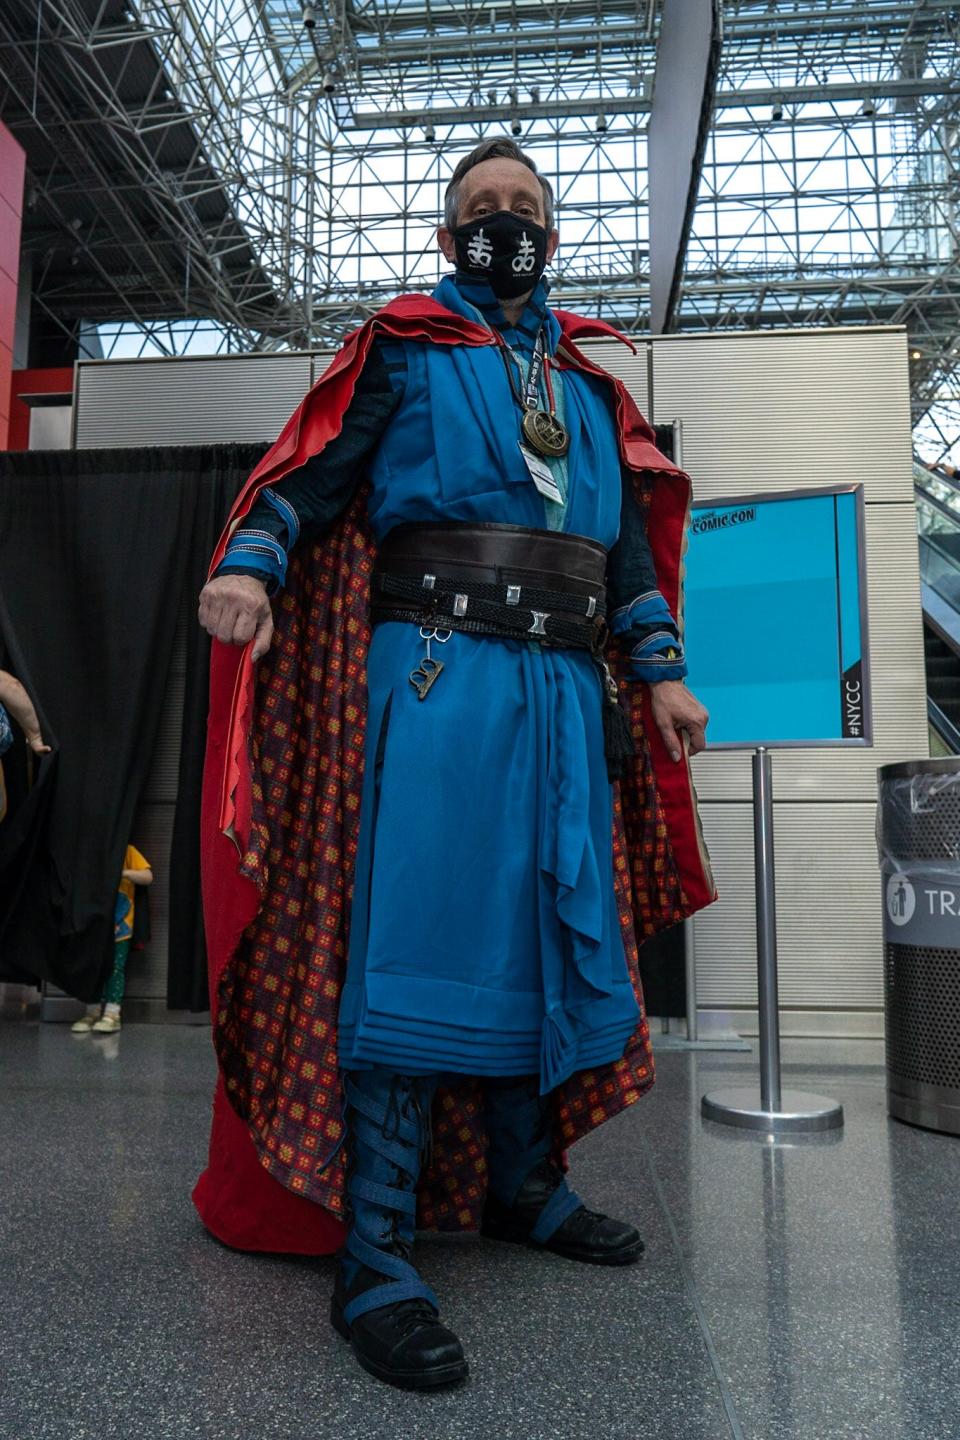 A cosplayer dressed as Doctor Strange at New York Comic Con 2021.